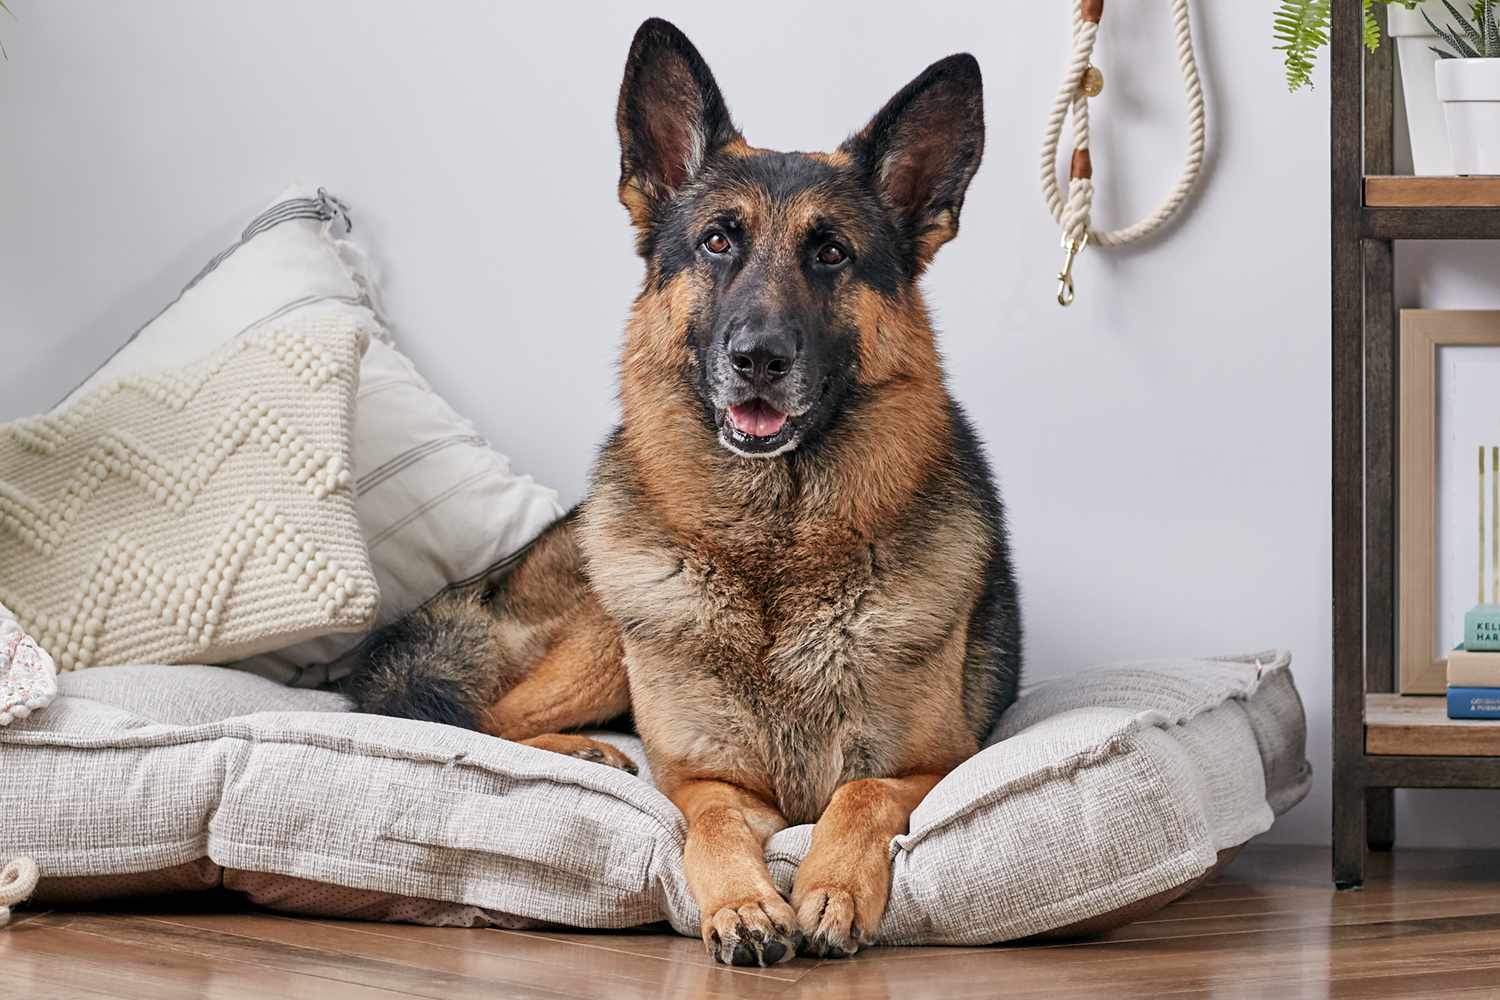 A German Shepherd resting on a dog bed